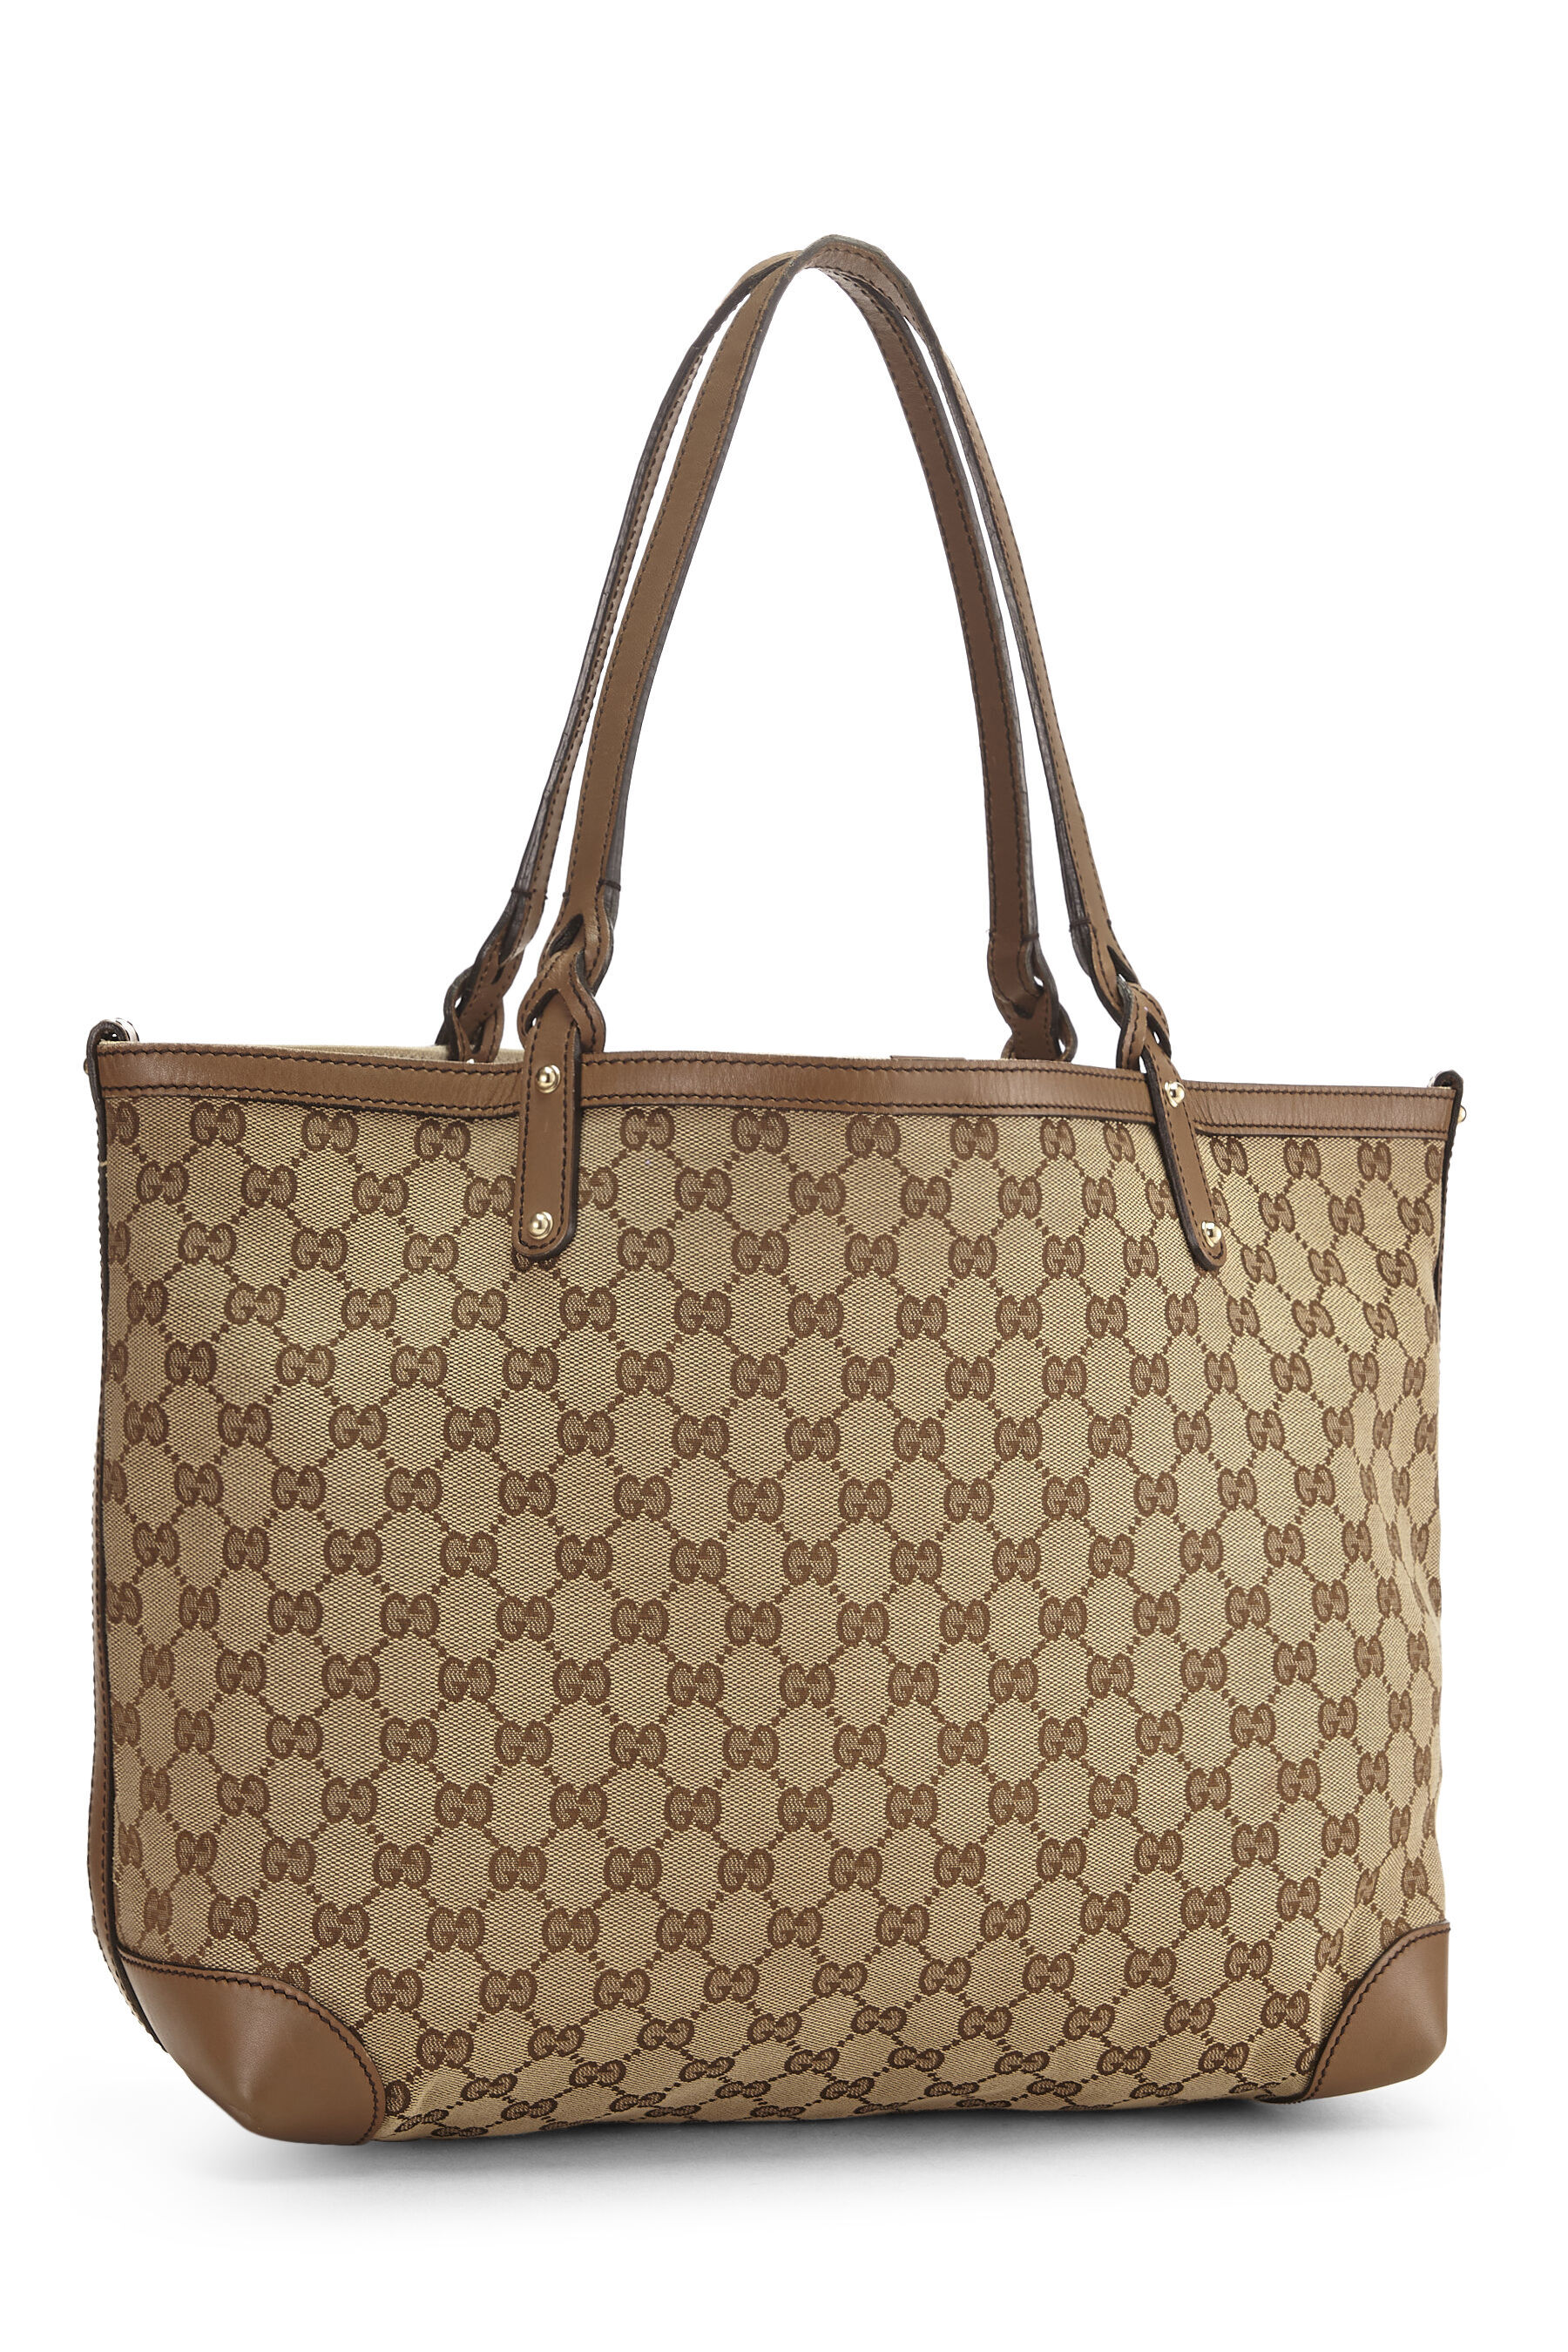 Ophidia large tote bag in beige and ebony Supreme | GUCCI® US